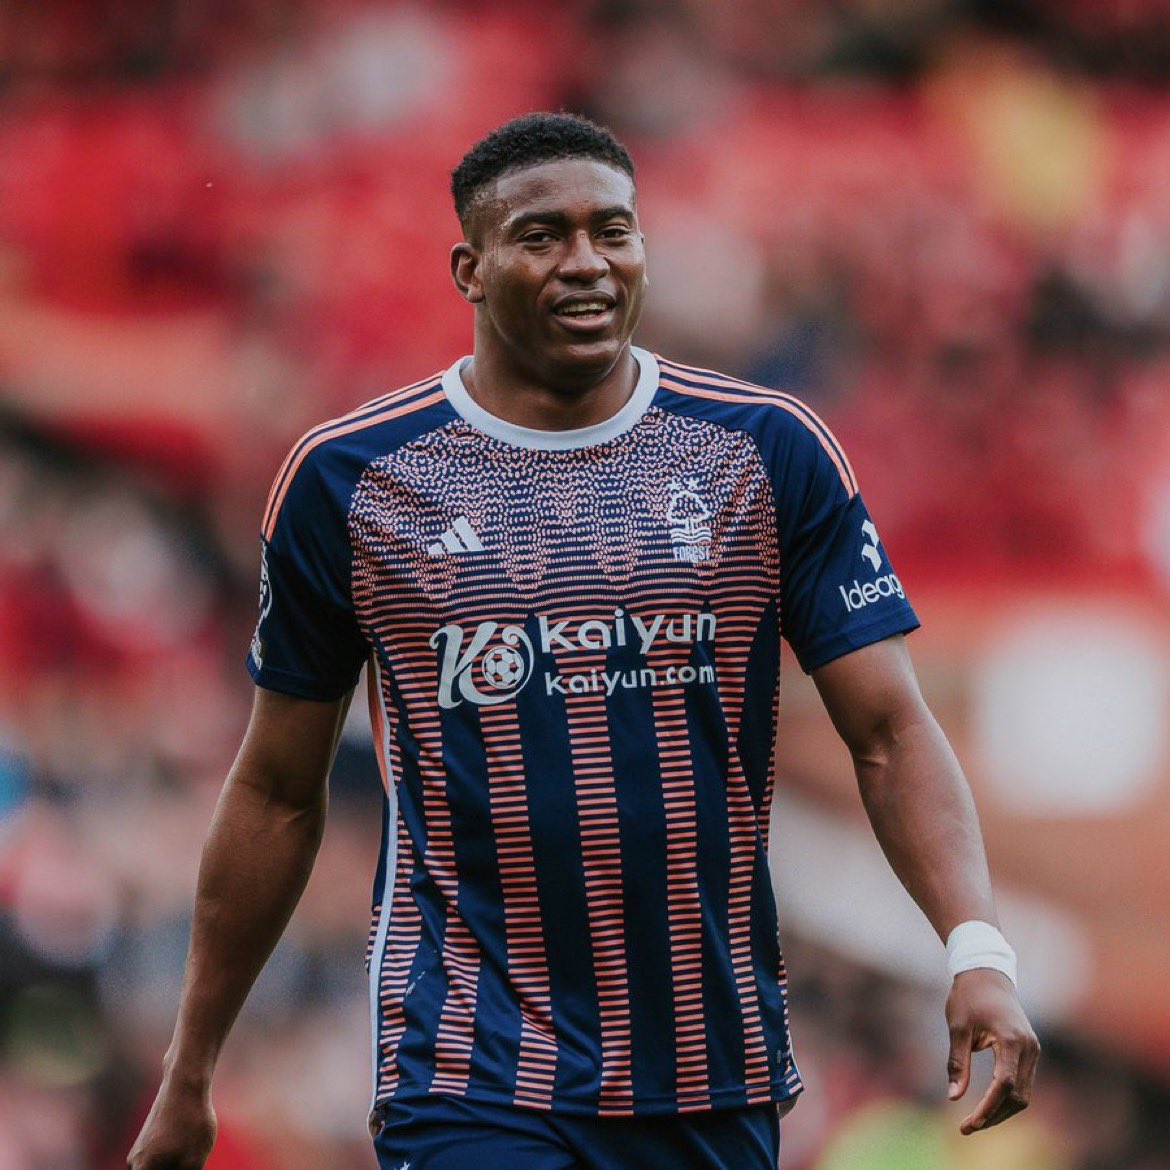 Taiwo Awoniyi: 'That’s a tough one, but I’m still under contract with Nottingham Forest and I’m here. So for now, I’m a Nottingham Forest player.' #NFFC @soccernet_ng